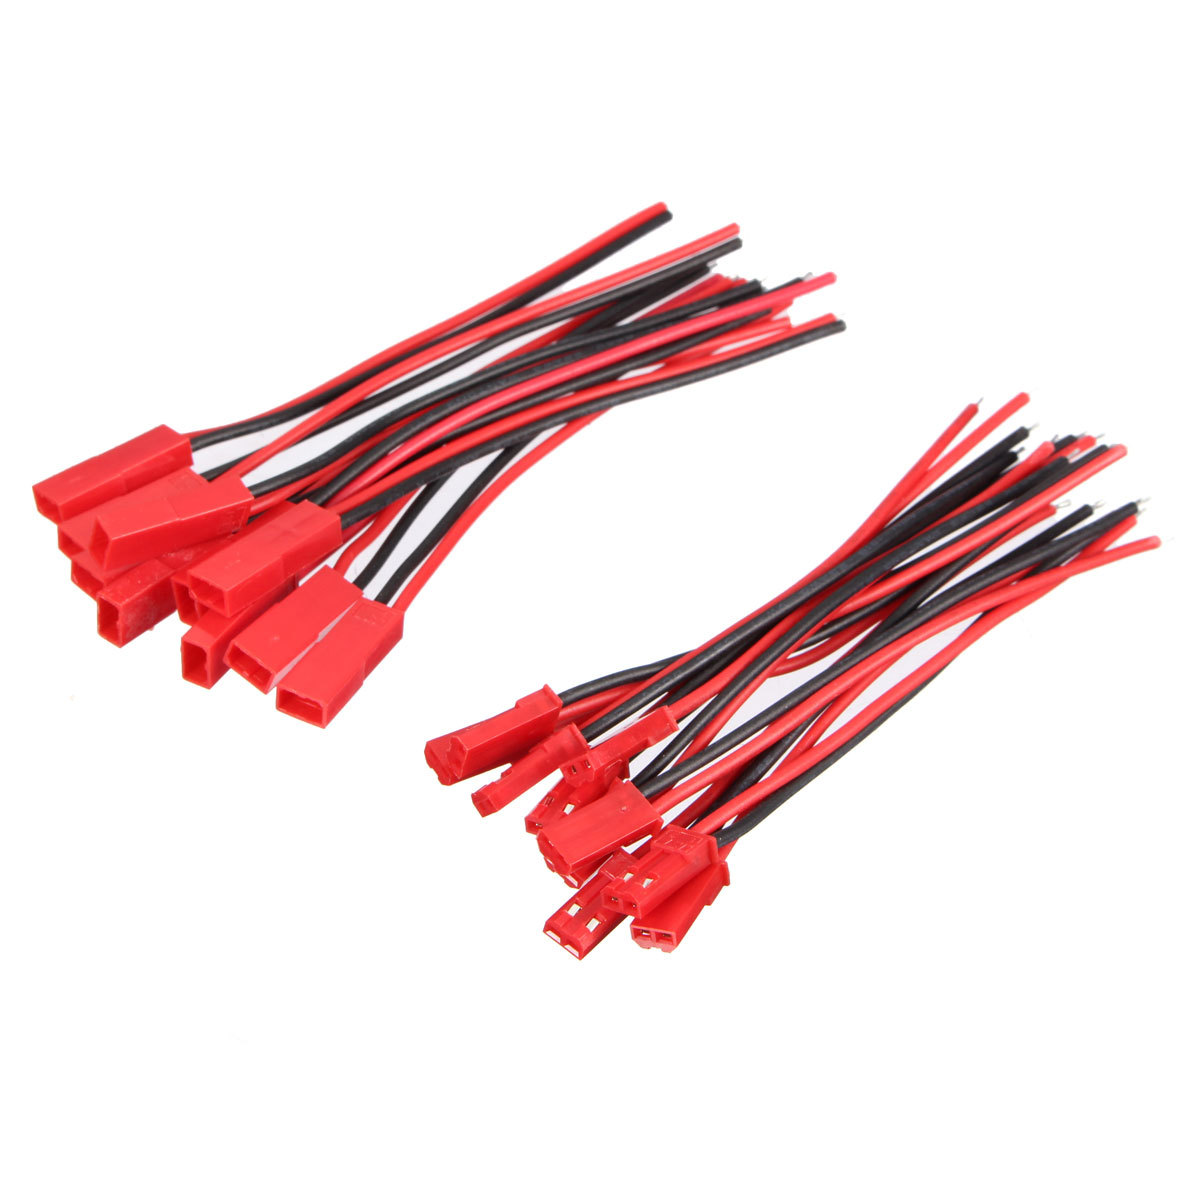 Excellway?® 10 Pairs 2 Pins JST Male & Female Connectors Plug Cable Wire Line 110mm Red 1